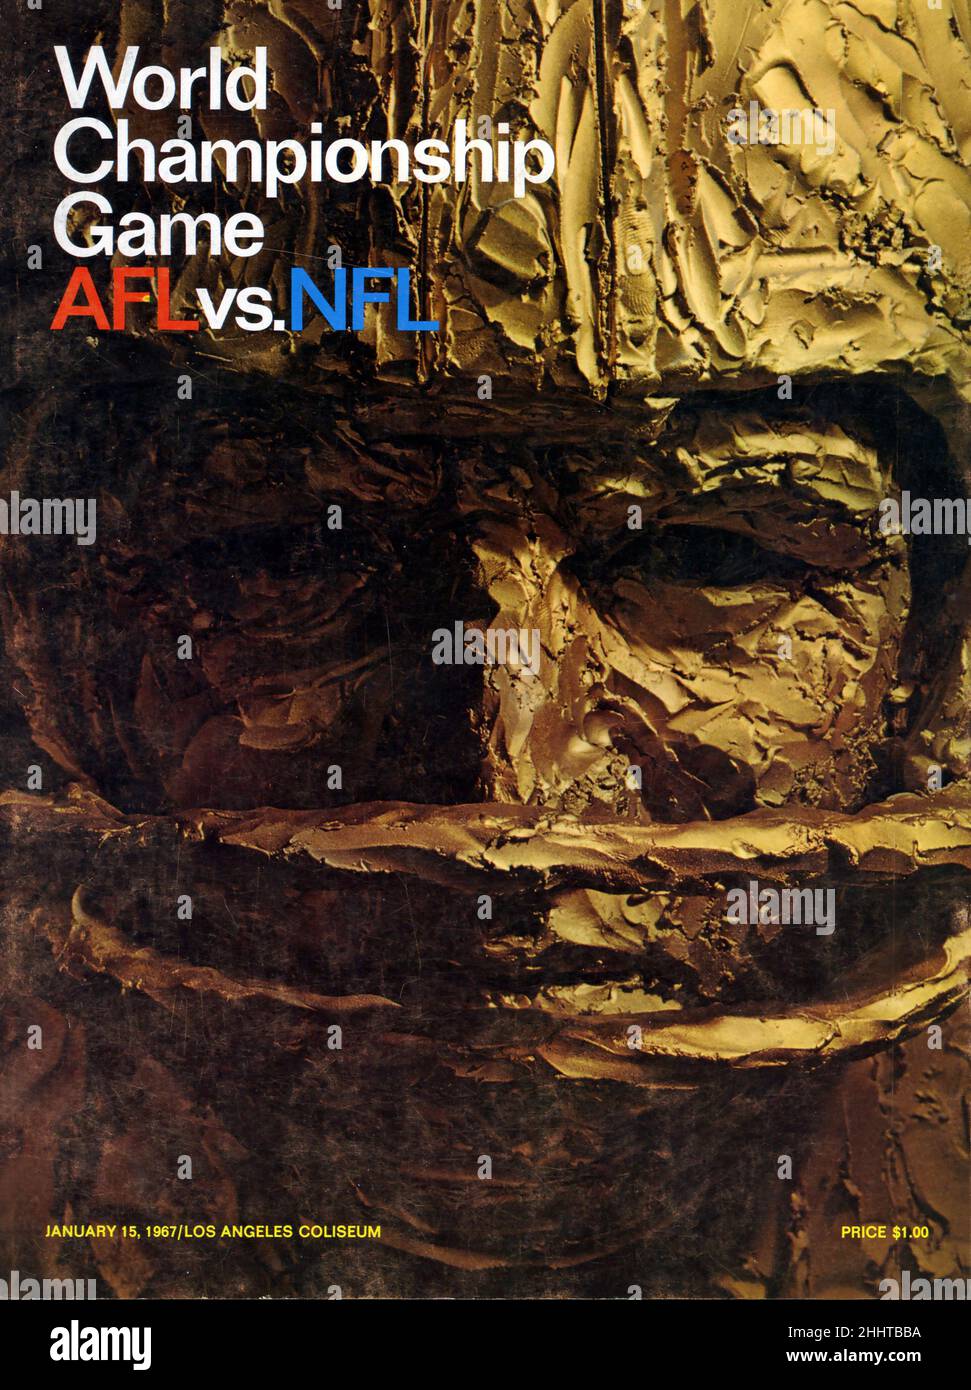 The cover of the program for the very first Super Bowl Game January, 1967 which at that time was called AFL vs.NFL World Championship Game and was held in the Los Angeles Coliseum. Stock Photo